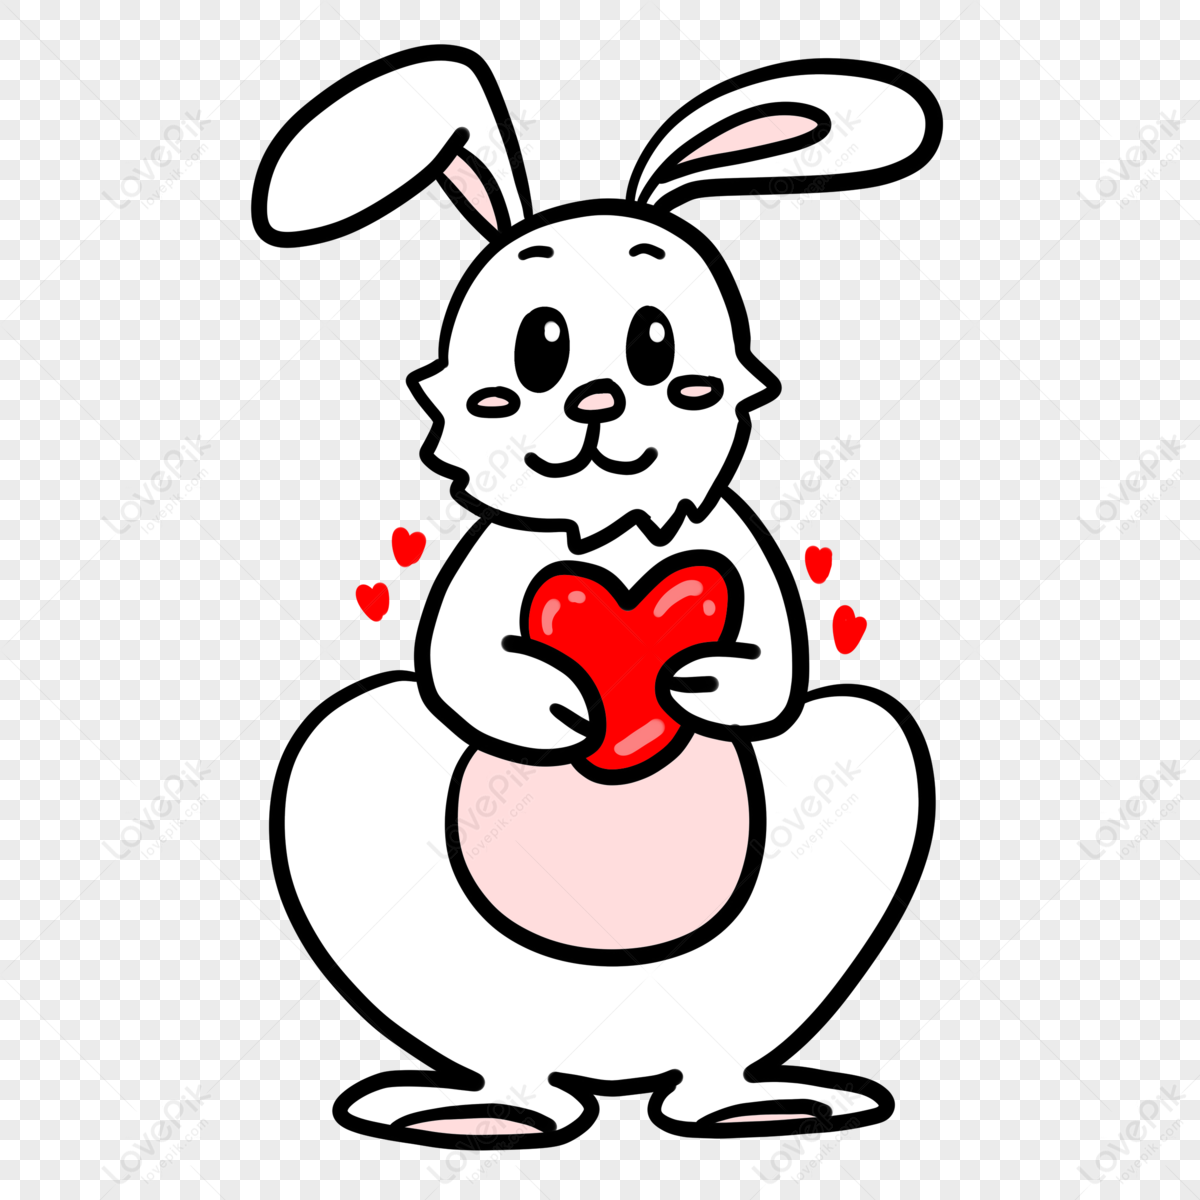 Cute Rabbits Clipart PNG Images With Transparent Background | Free ...